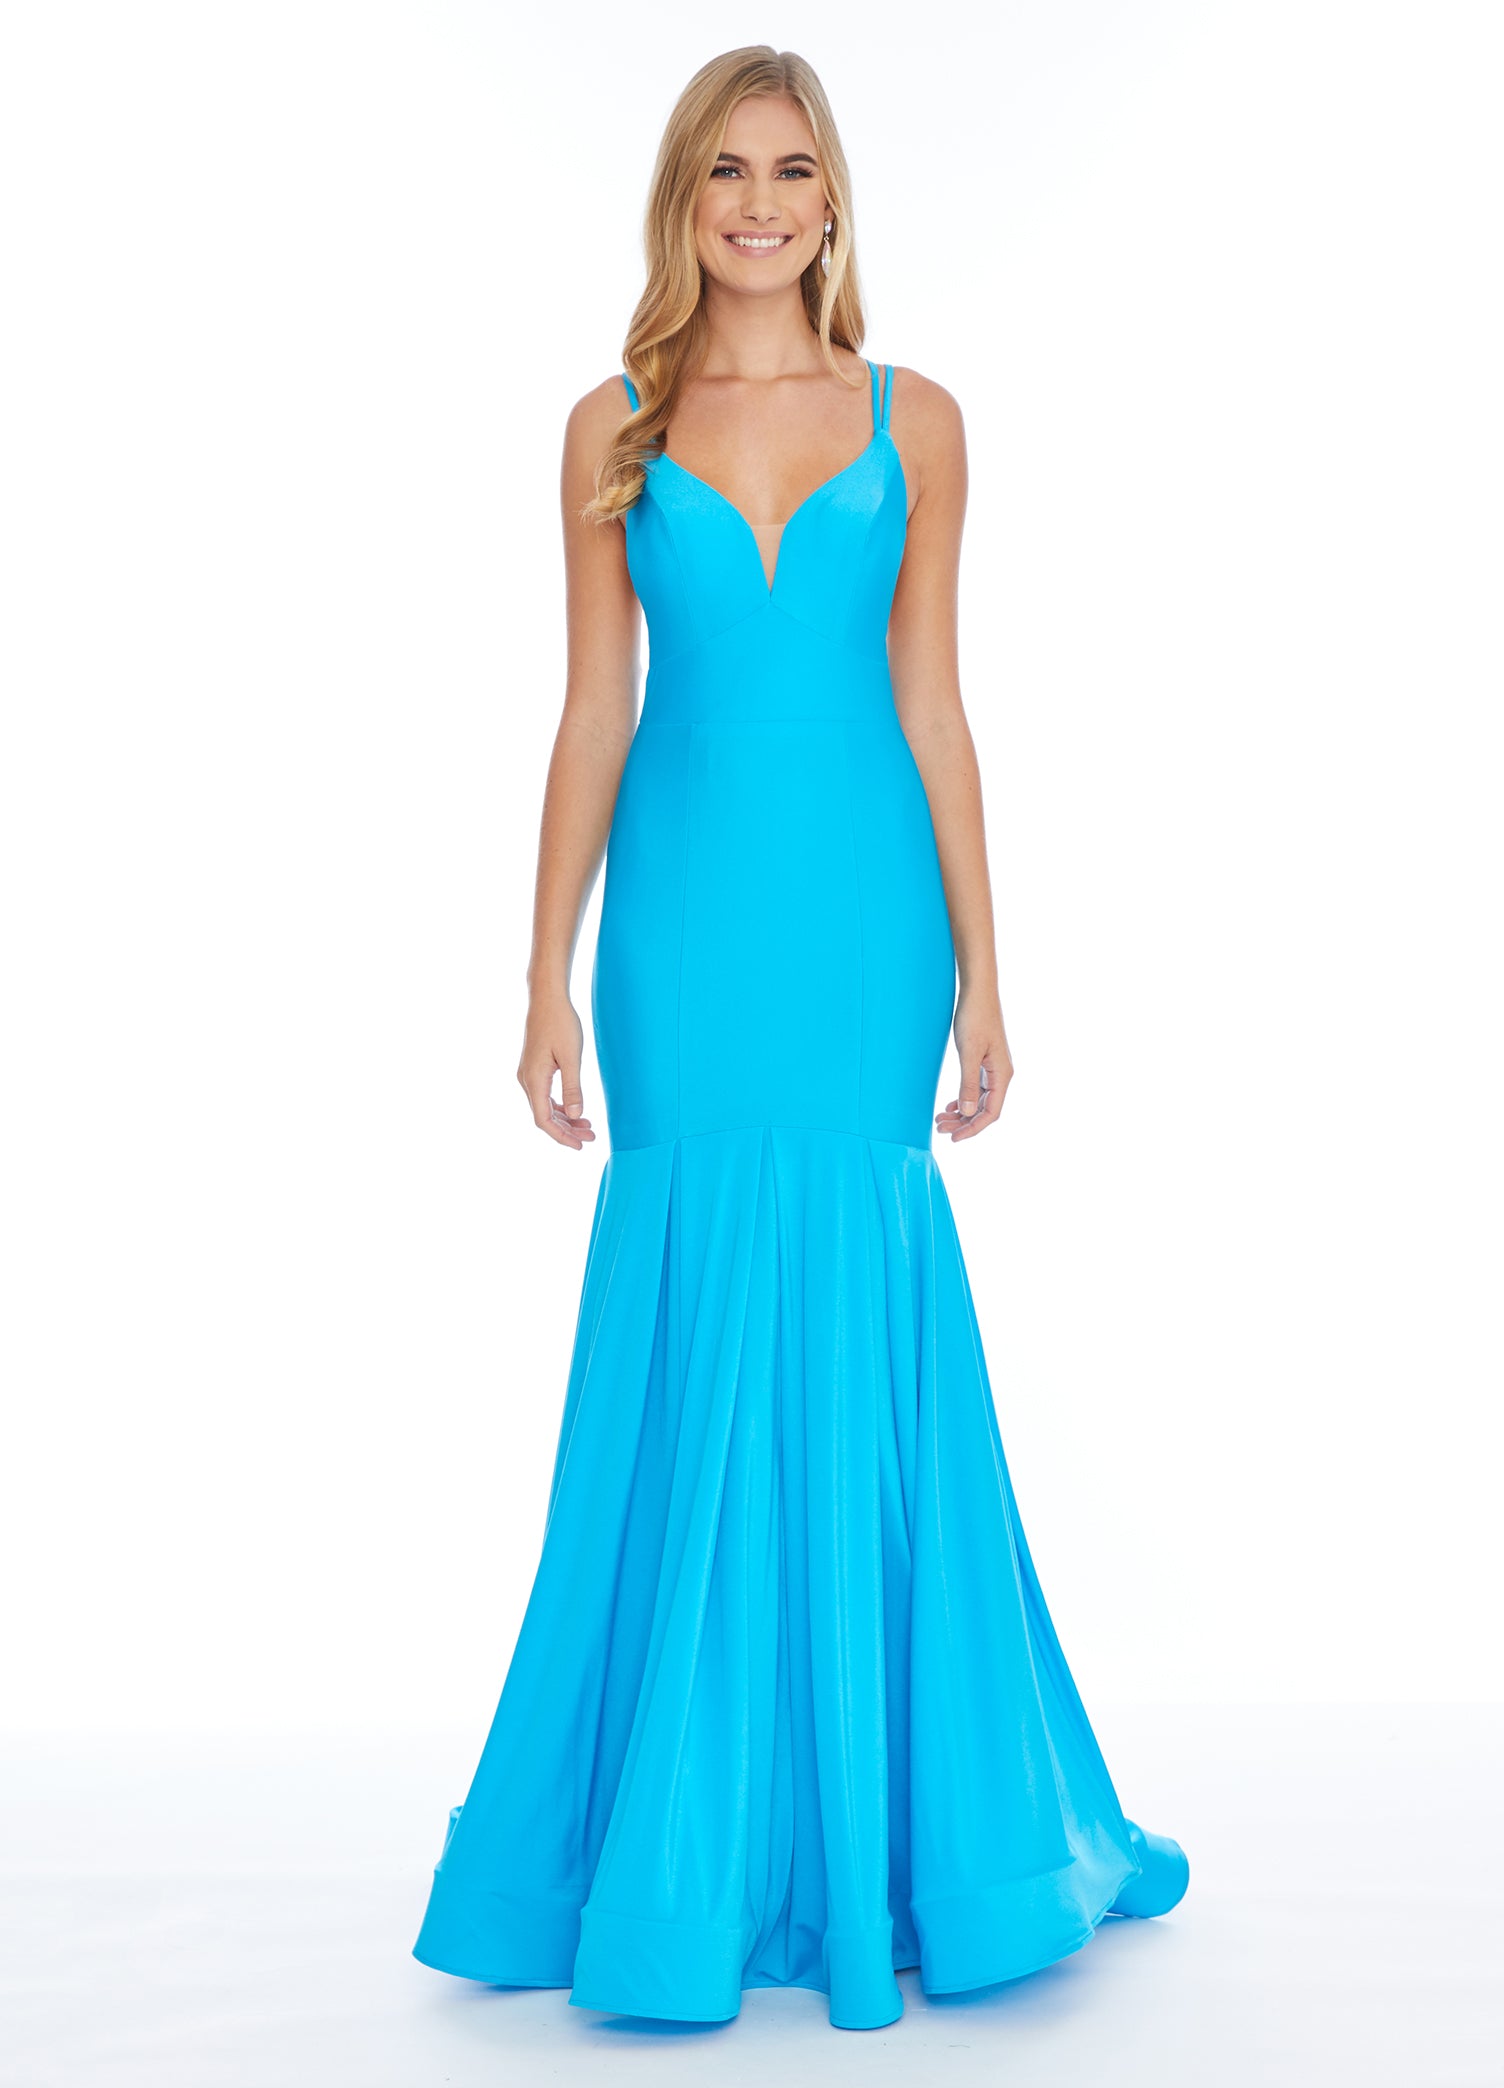 Ashley Lauren 1870 This stunning fit & flare evening gown is sure to turn heads! The bustier is has a v-neckline complete with double spaghetti straps and illusion panel sides. The skirt embellished with box-pleats and sweeping train. Racer Back Jersey